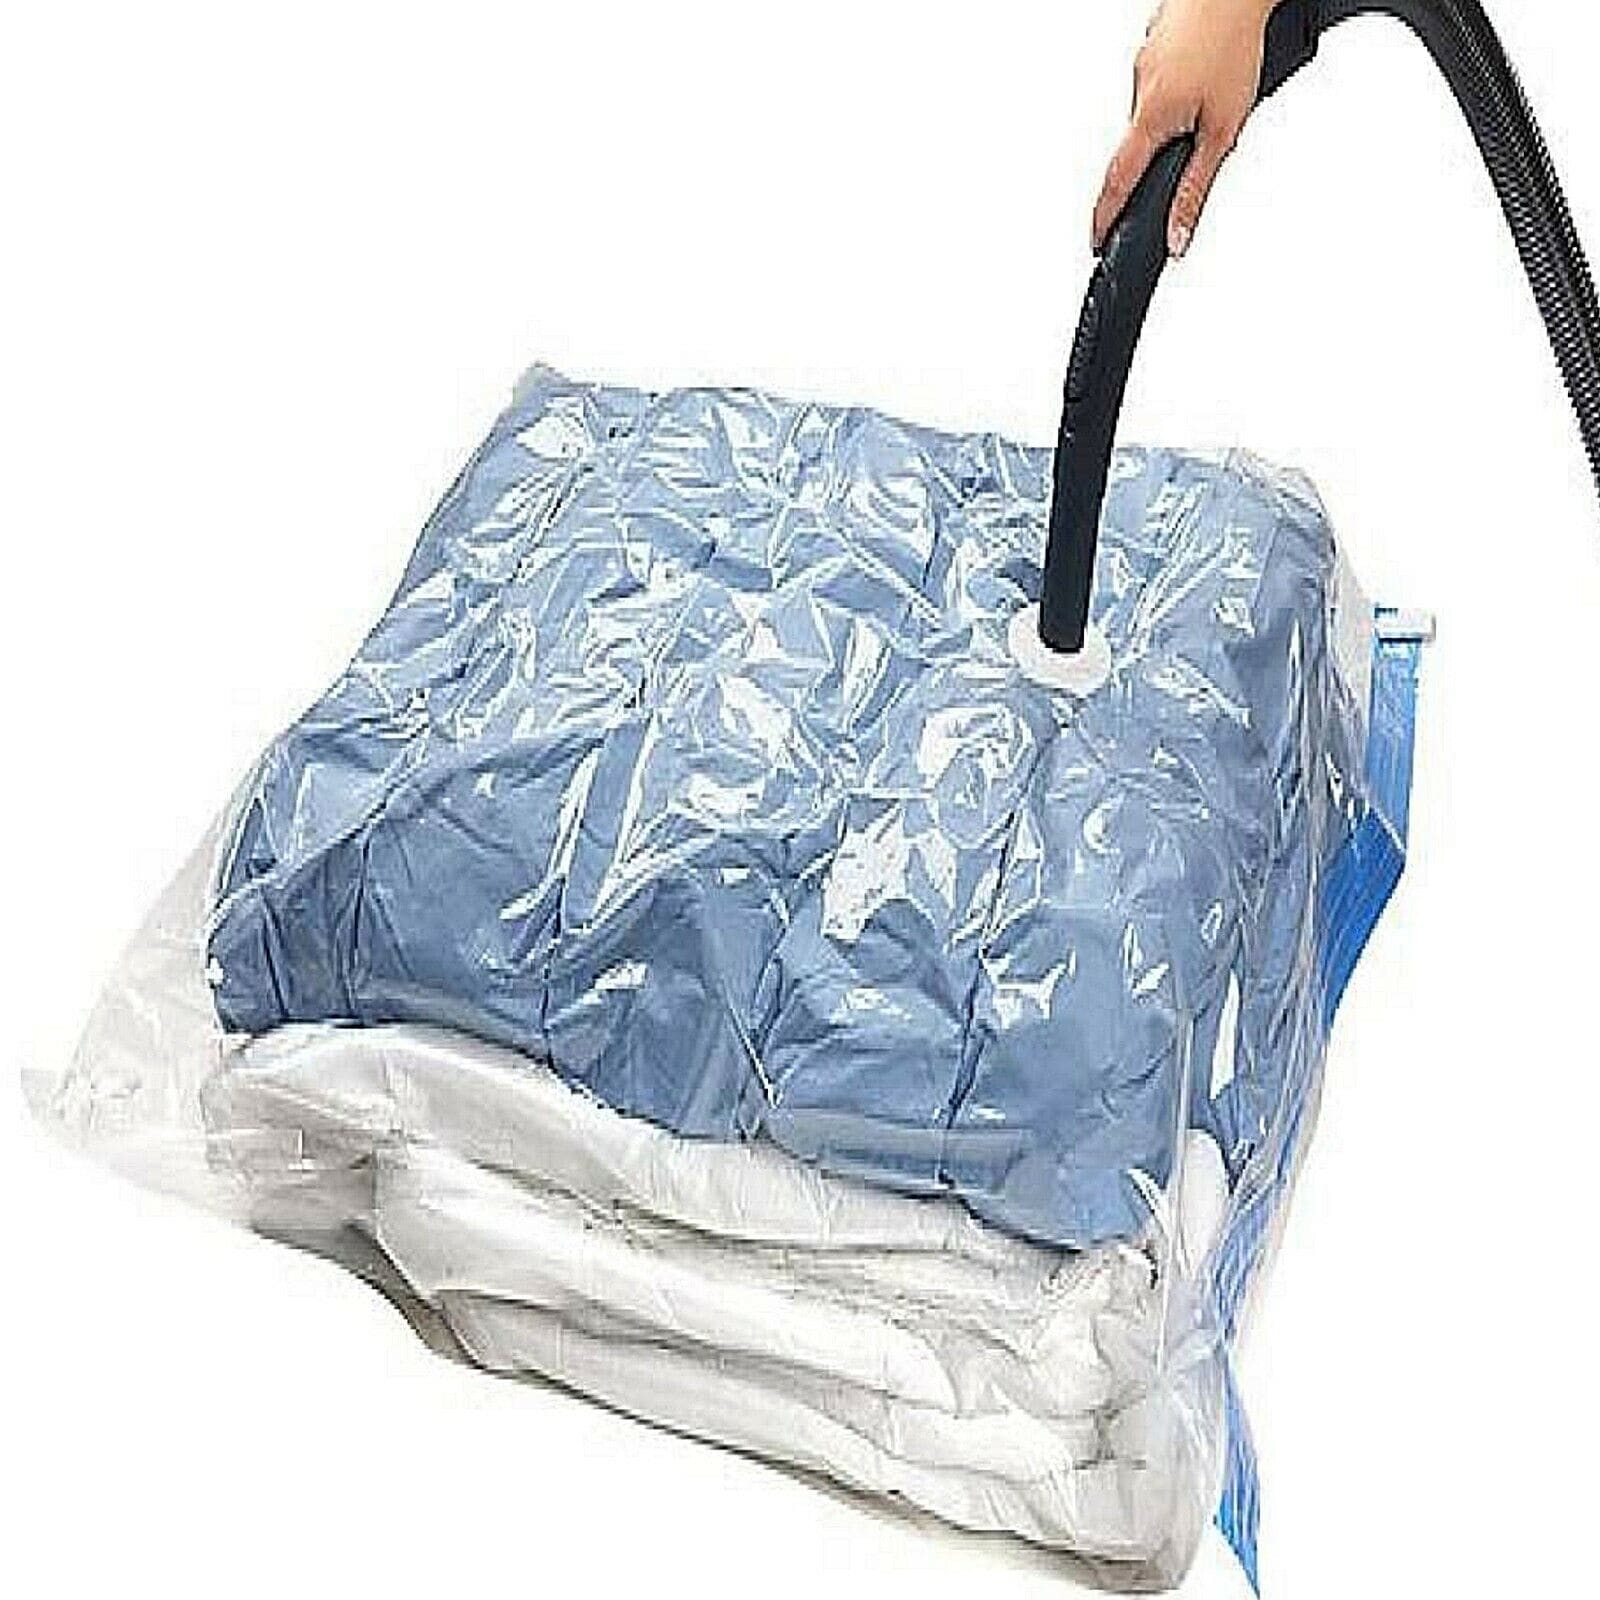 https://ak1.ostkcdn.com/images/products/is/images/direct/b9736d8b42c36b9ff5618f41afa76848f5d57351/Jumbo-Vacuum-Storage-Bags-Maximize-Space-And-Organize.jpg